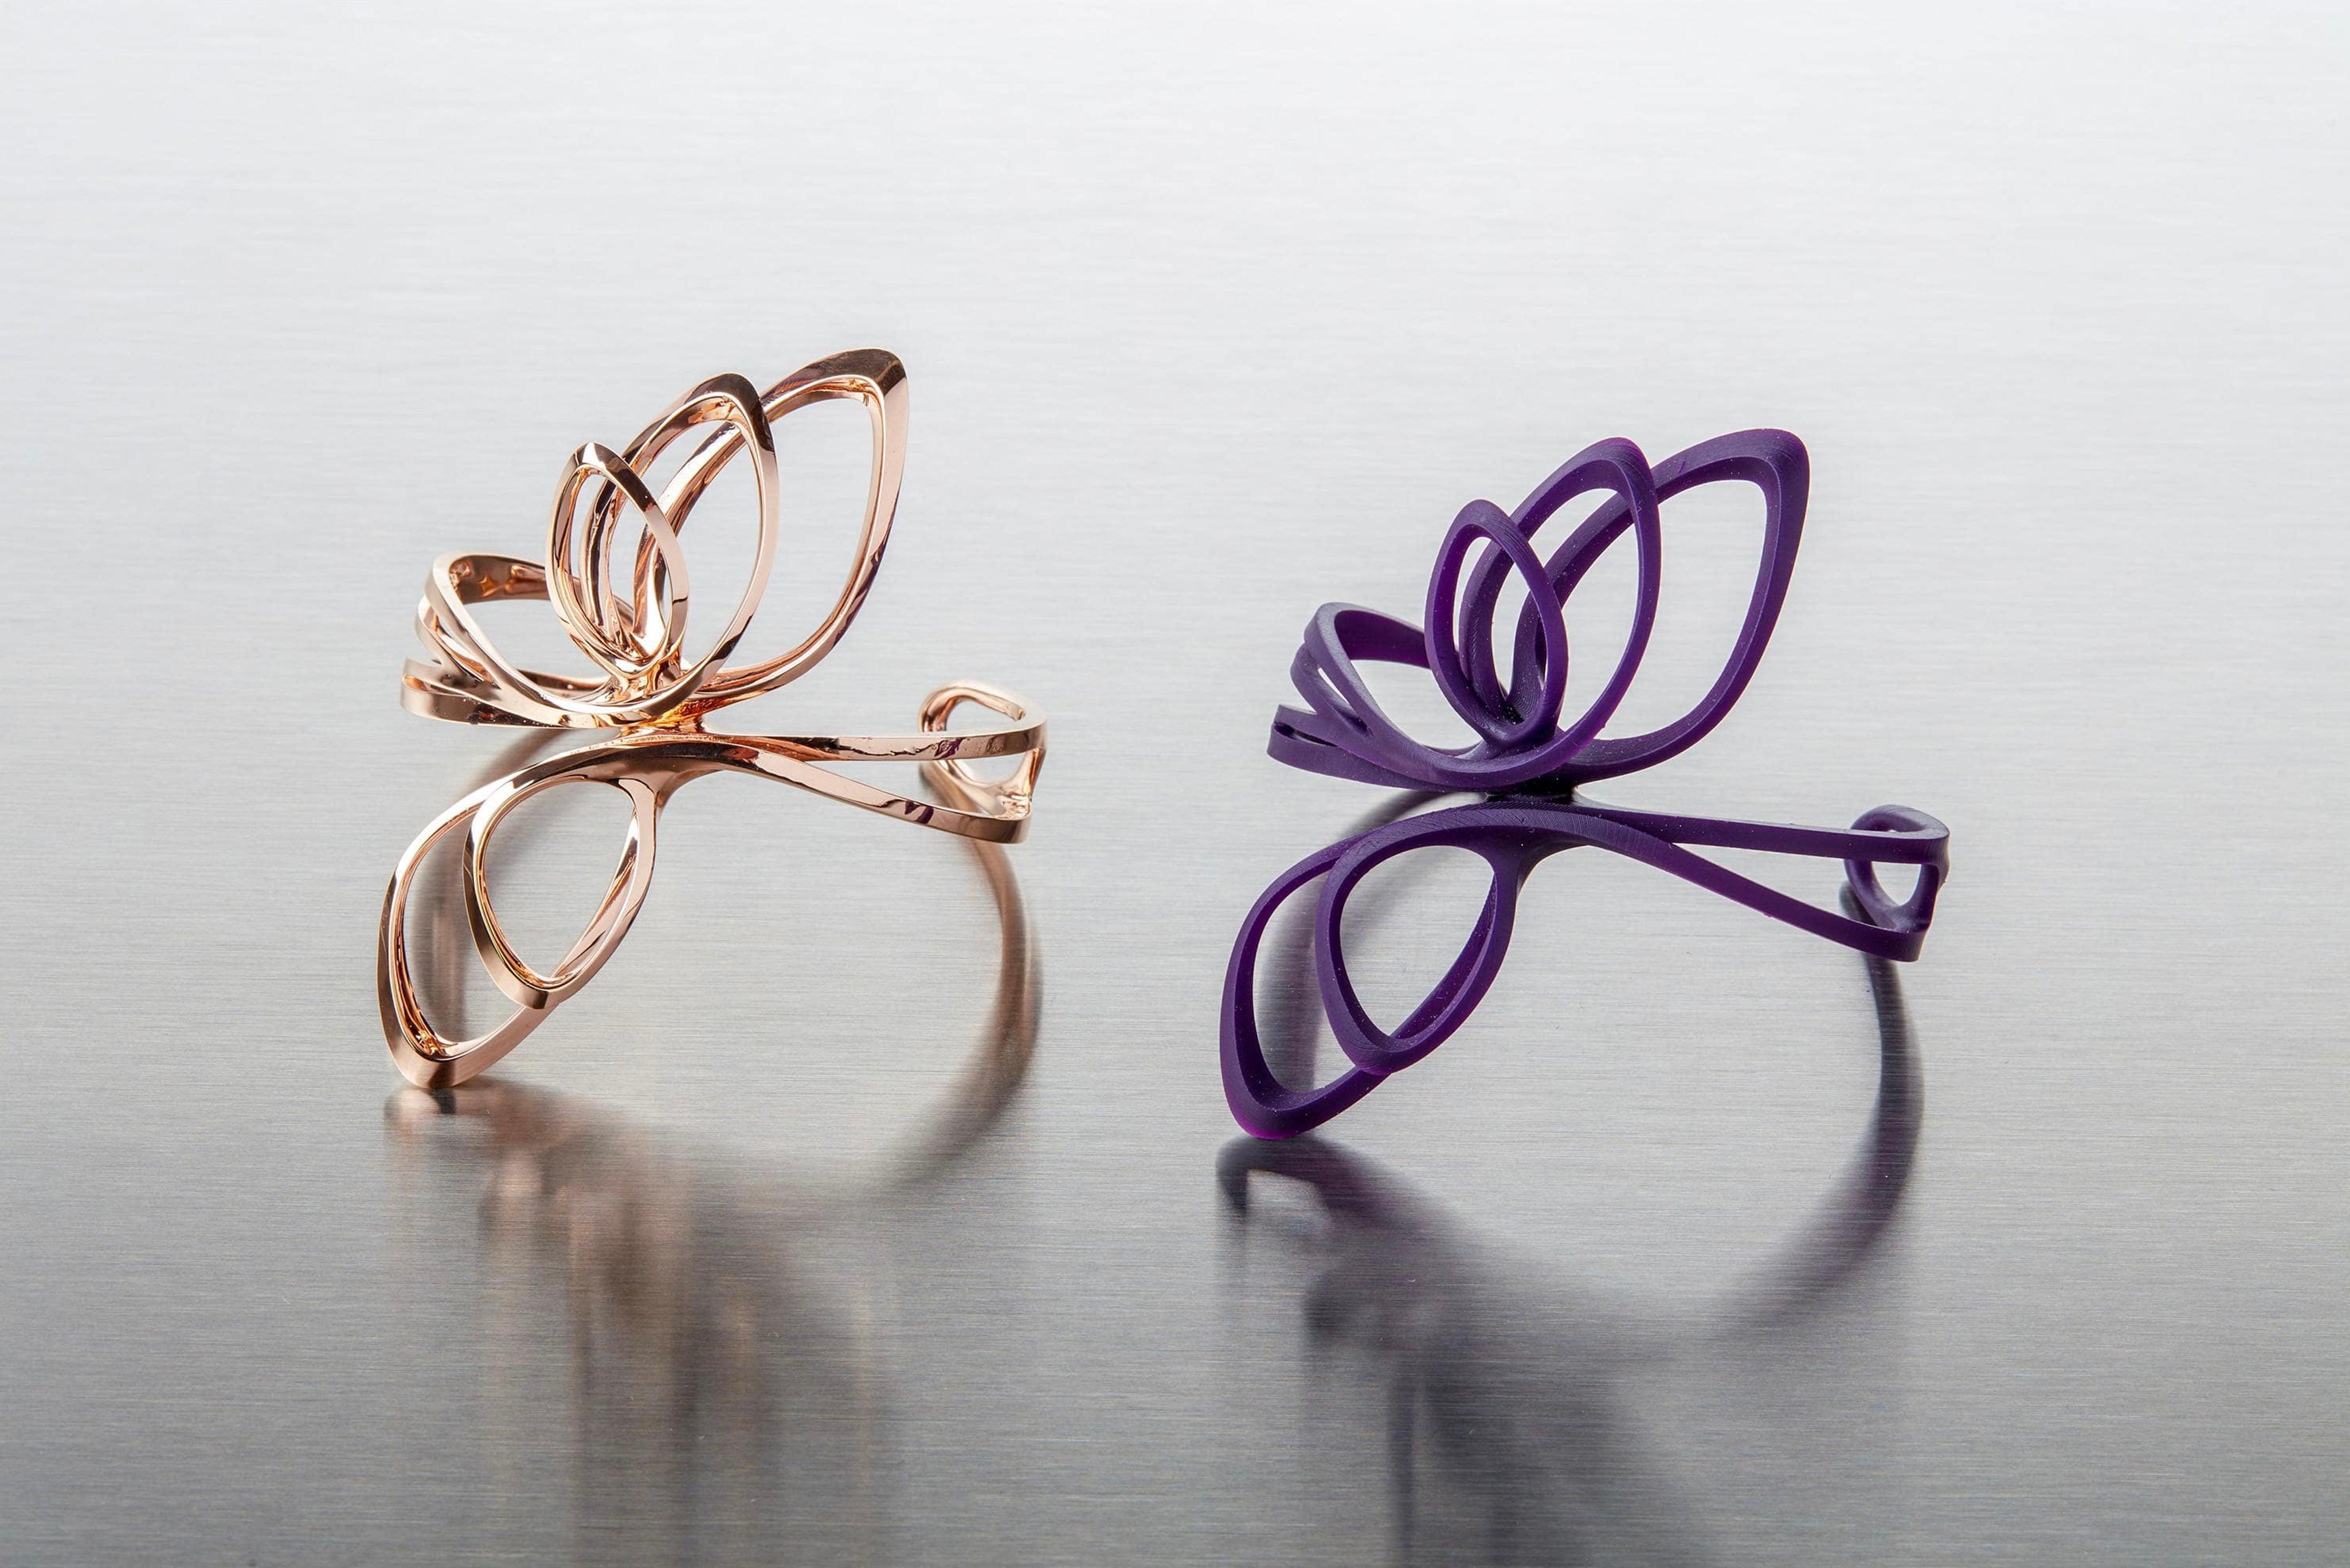 Learn more about 3D Printing Technologies & Materials in Jewelry - LACE by JennyWu